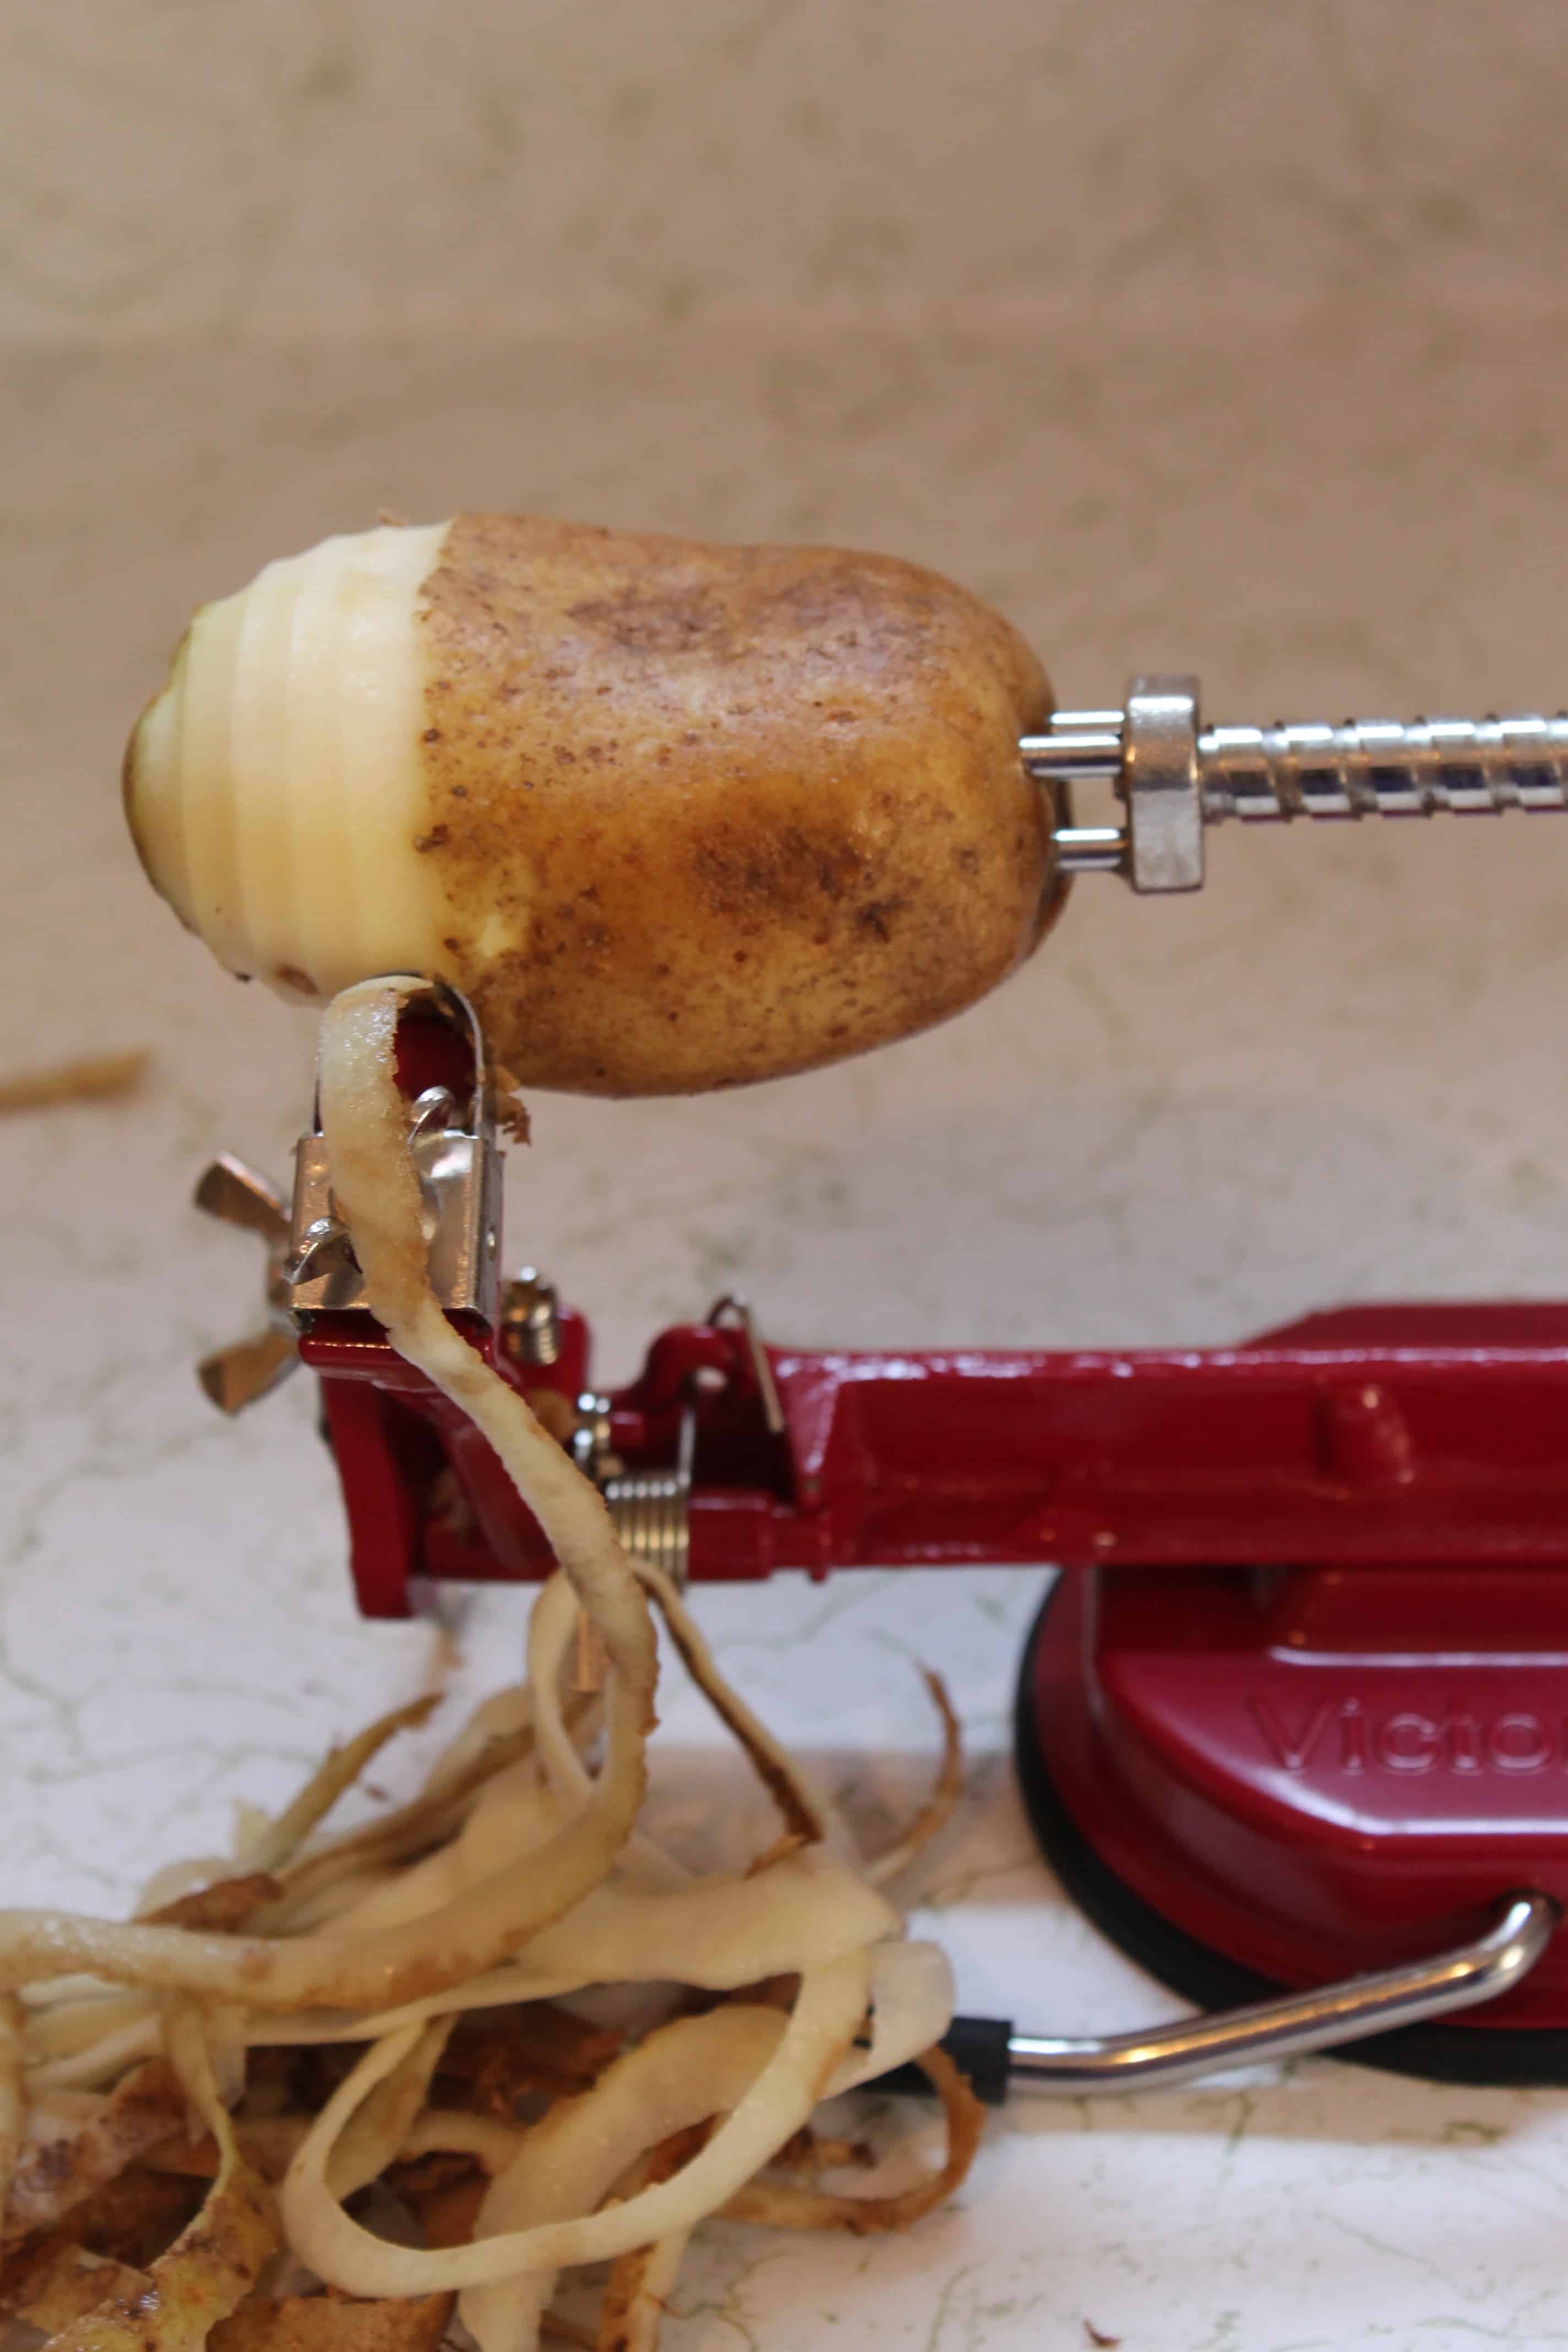 a "johnny apple peeler" being used to peel russet potatoes for homemade mashed potatoes